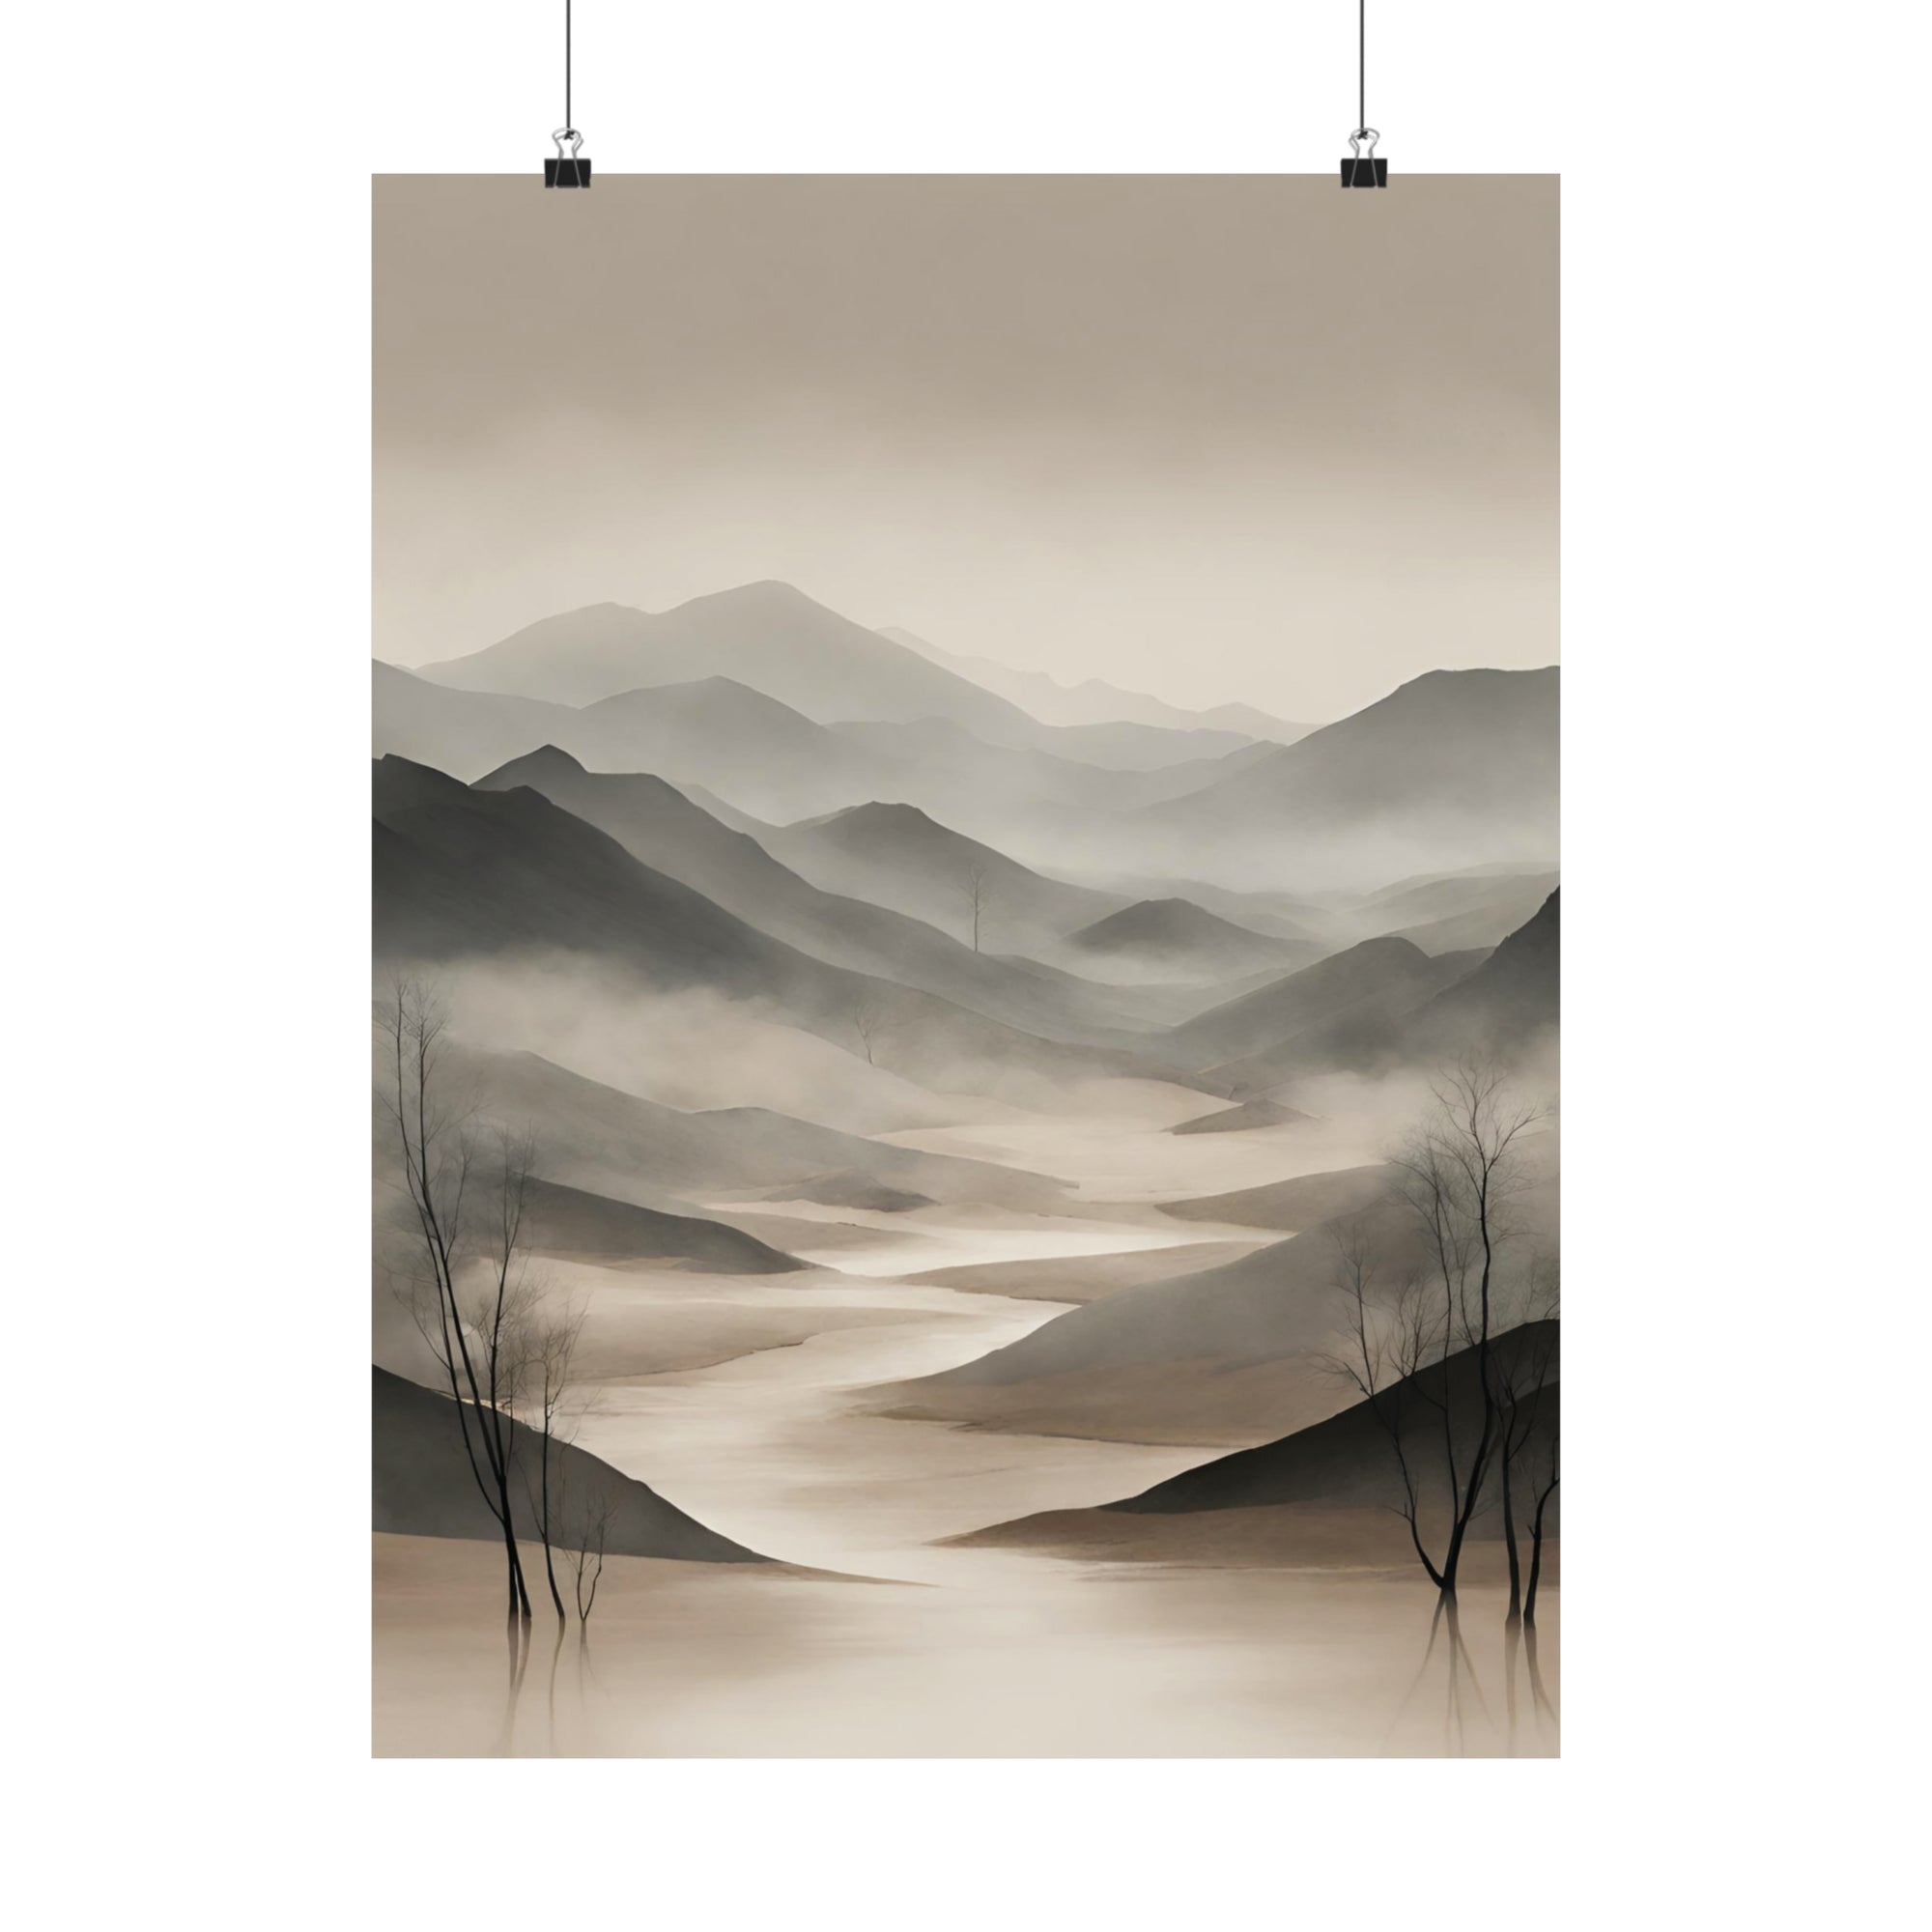 Moody Mysterious Series - Valley 1 - Matte Vertical Abstract Art Posters